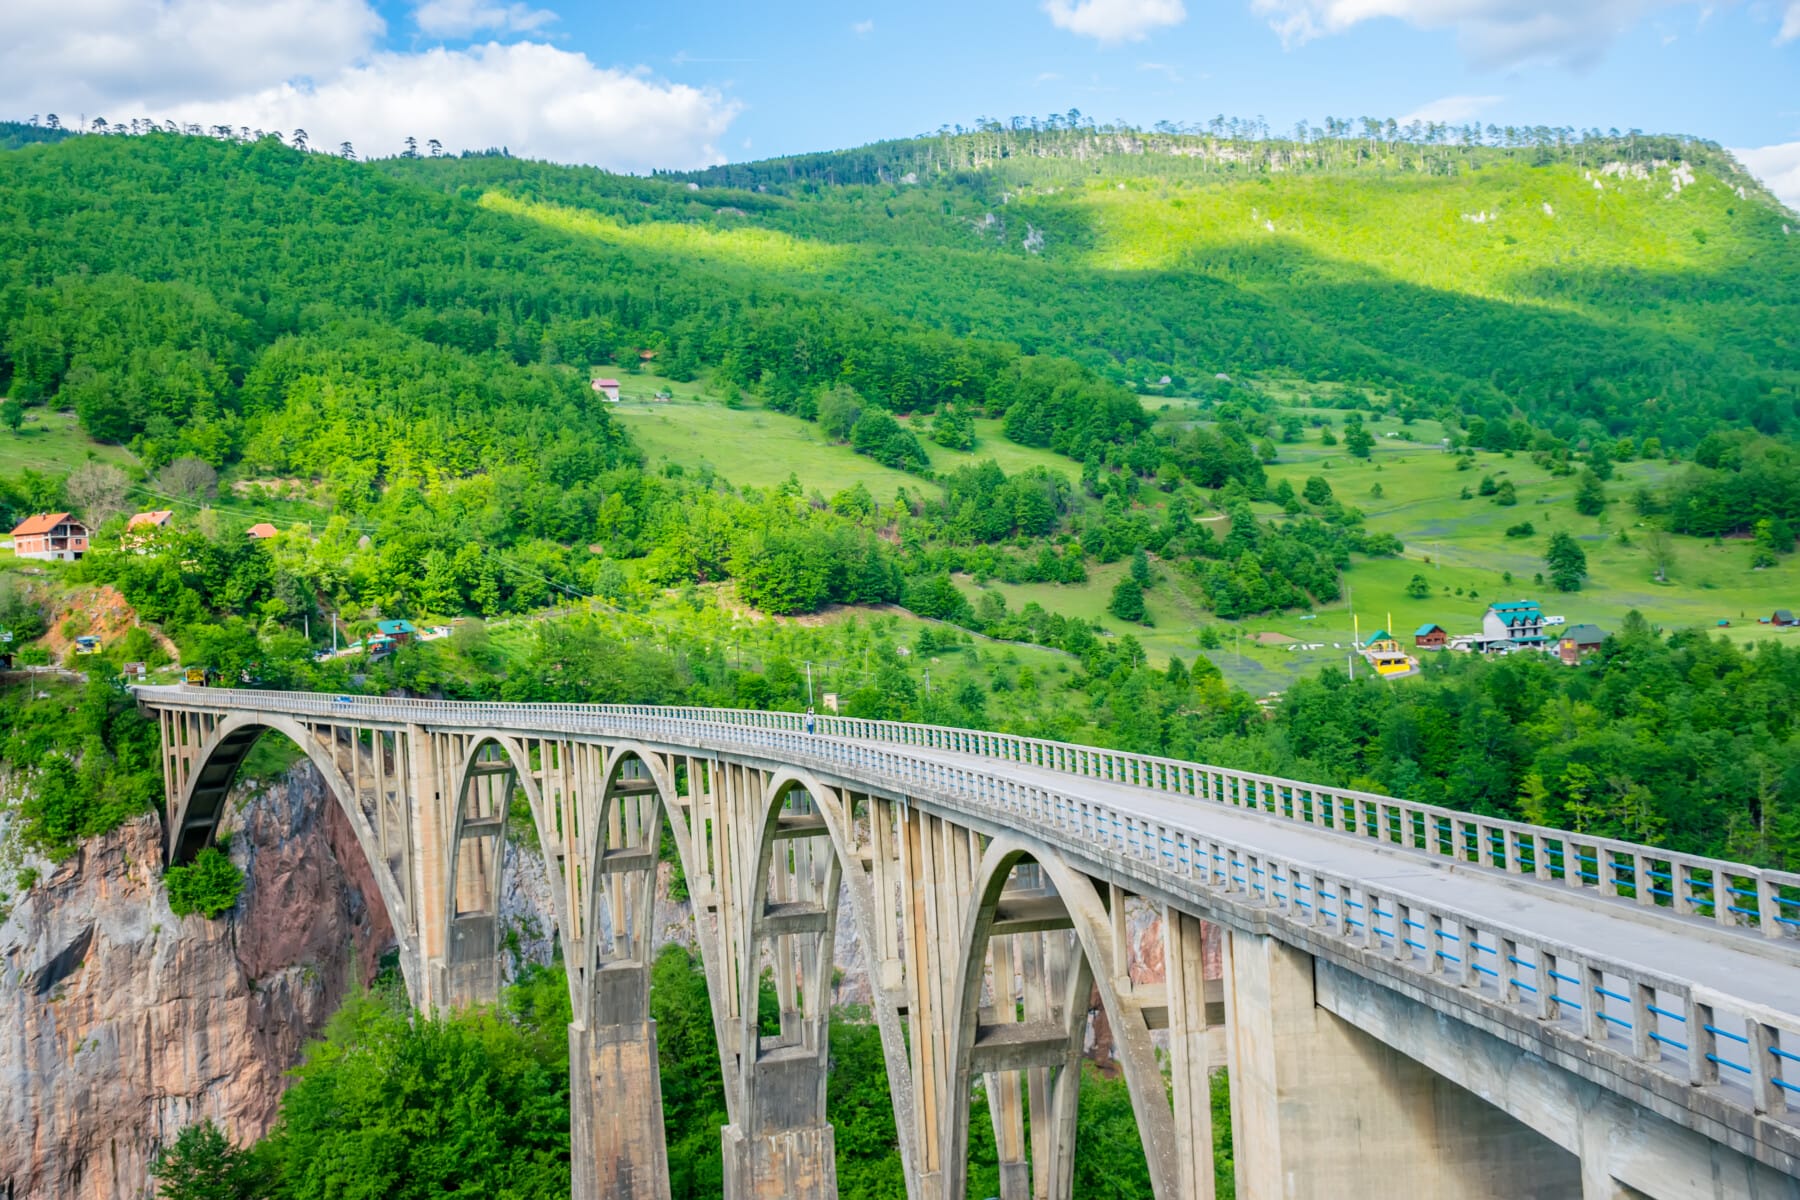 The Djurdjevic Bridge crosses the canyon of the Tara River in the north of Montenegro.